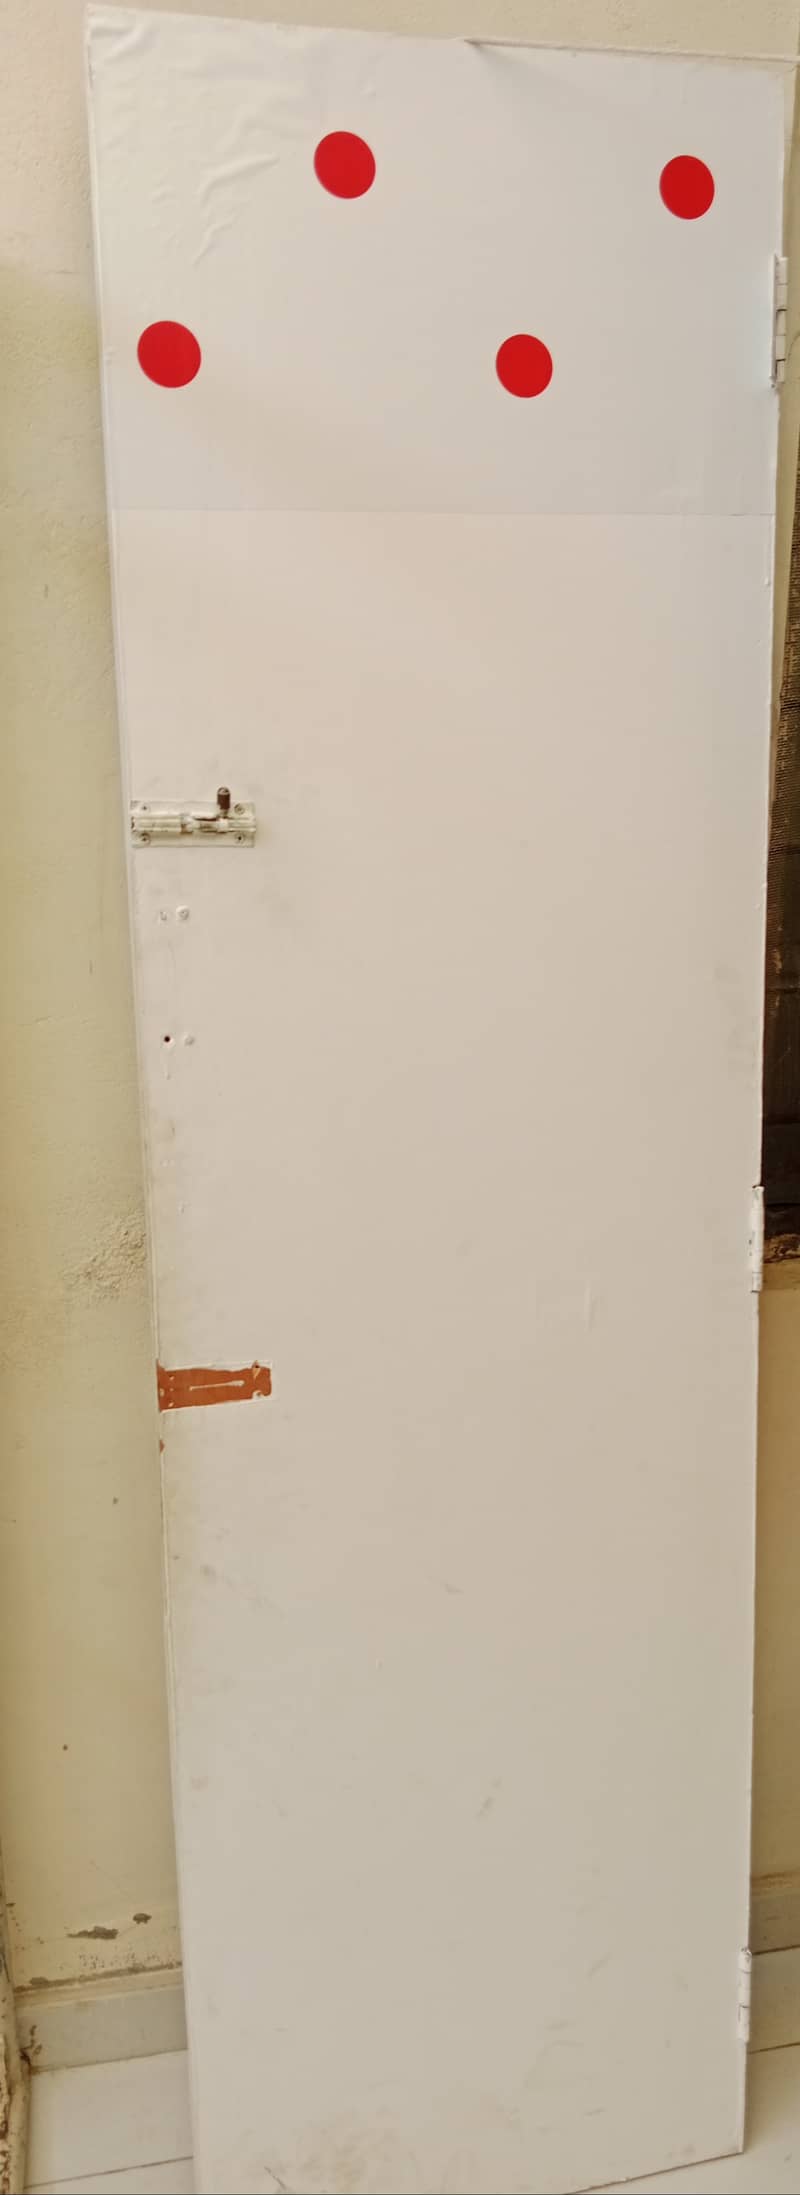 Door for sale neat and clean only WhatsUp 03060103003 1